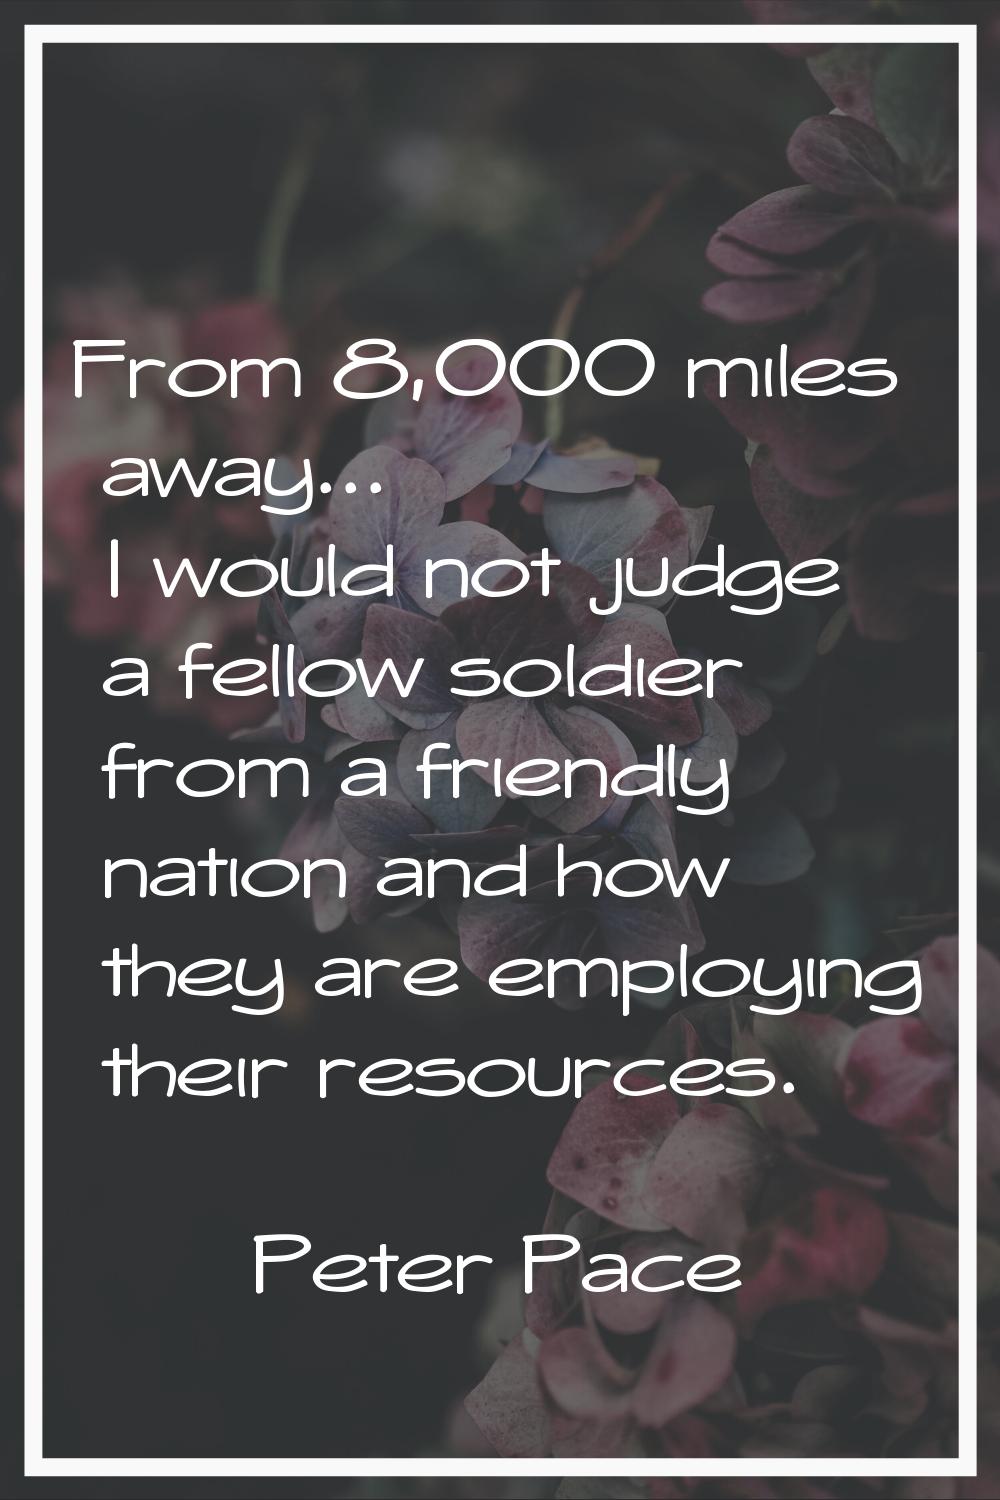 From 8,000 miles away... I would not judge a fellow soldier from a friendly nation and how they are